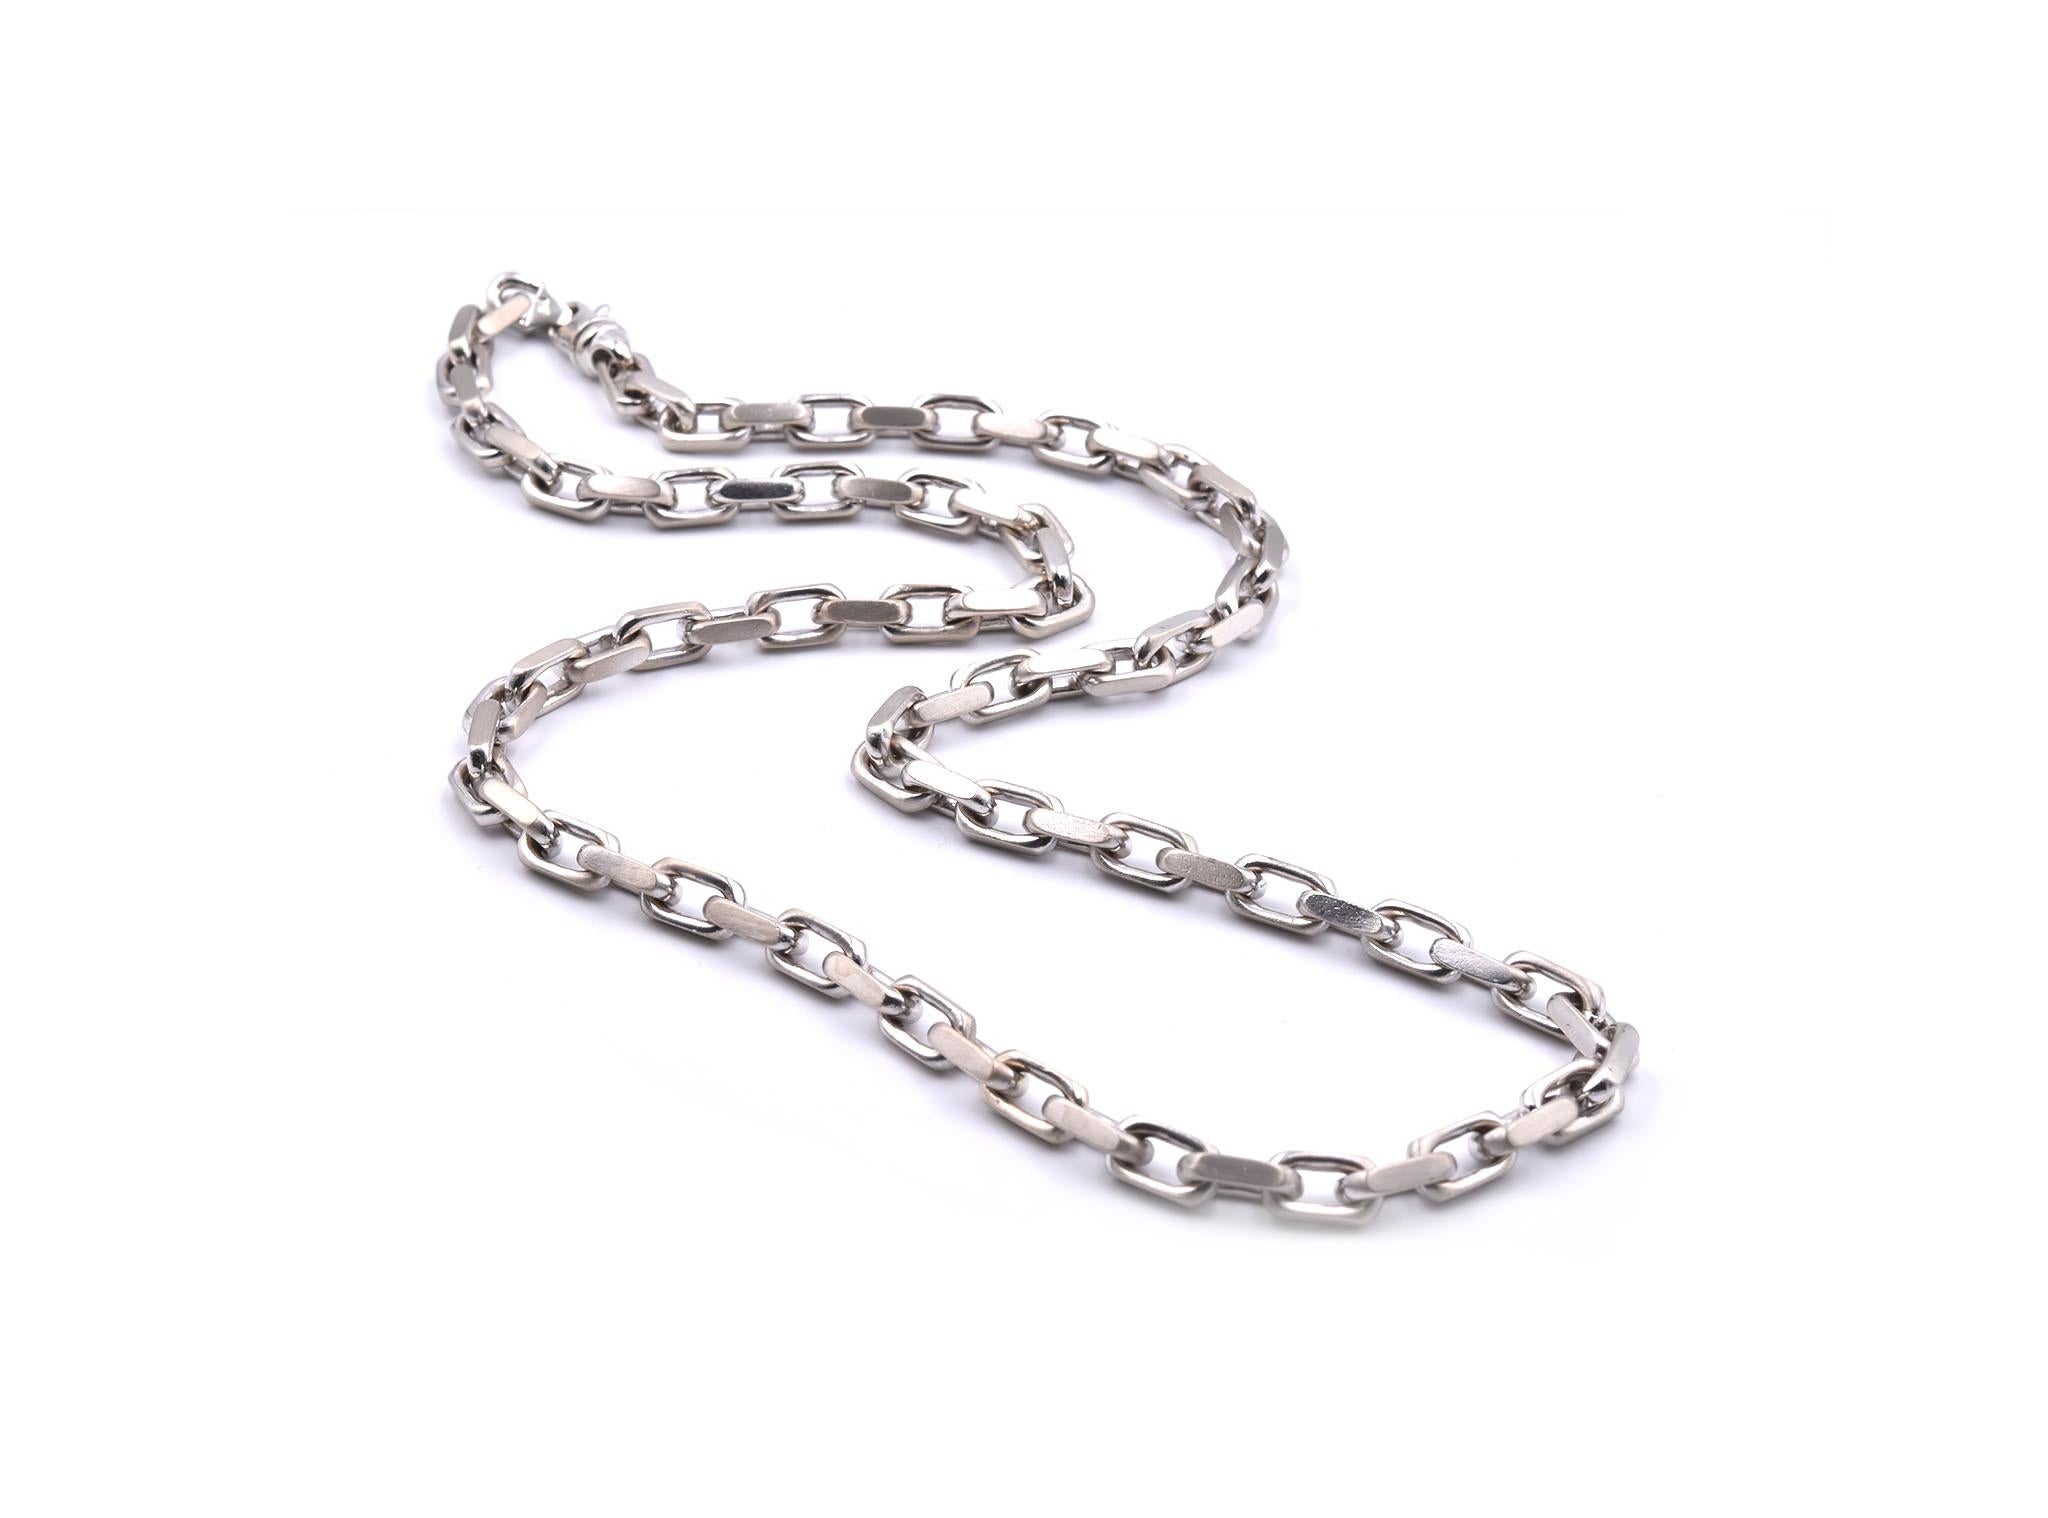 Designer: custom designed
Material: 14k white gold
Dimensions: necklace is 28-inches long and 7.87mm
Weight: 166.36 grams
